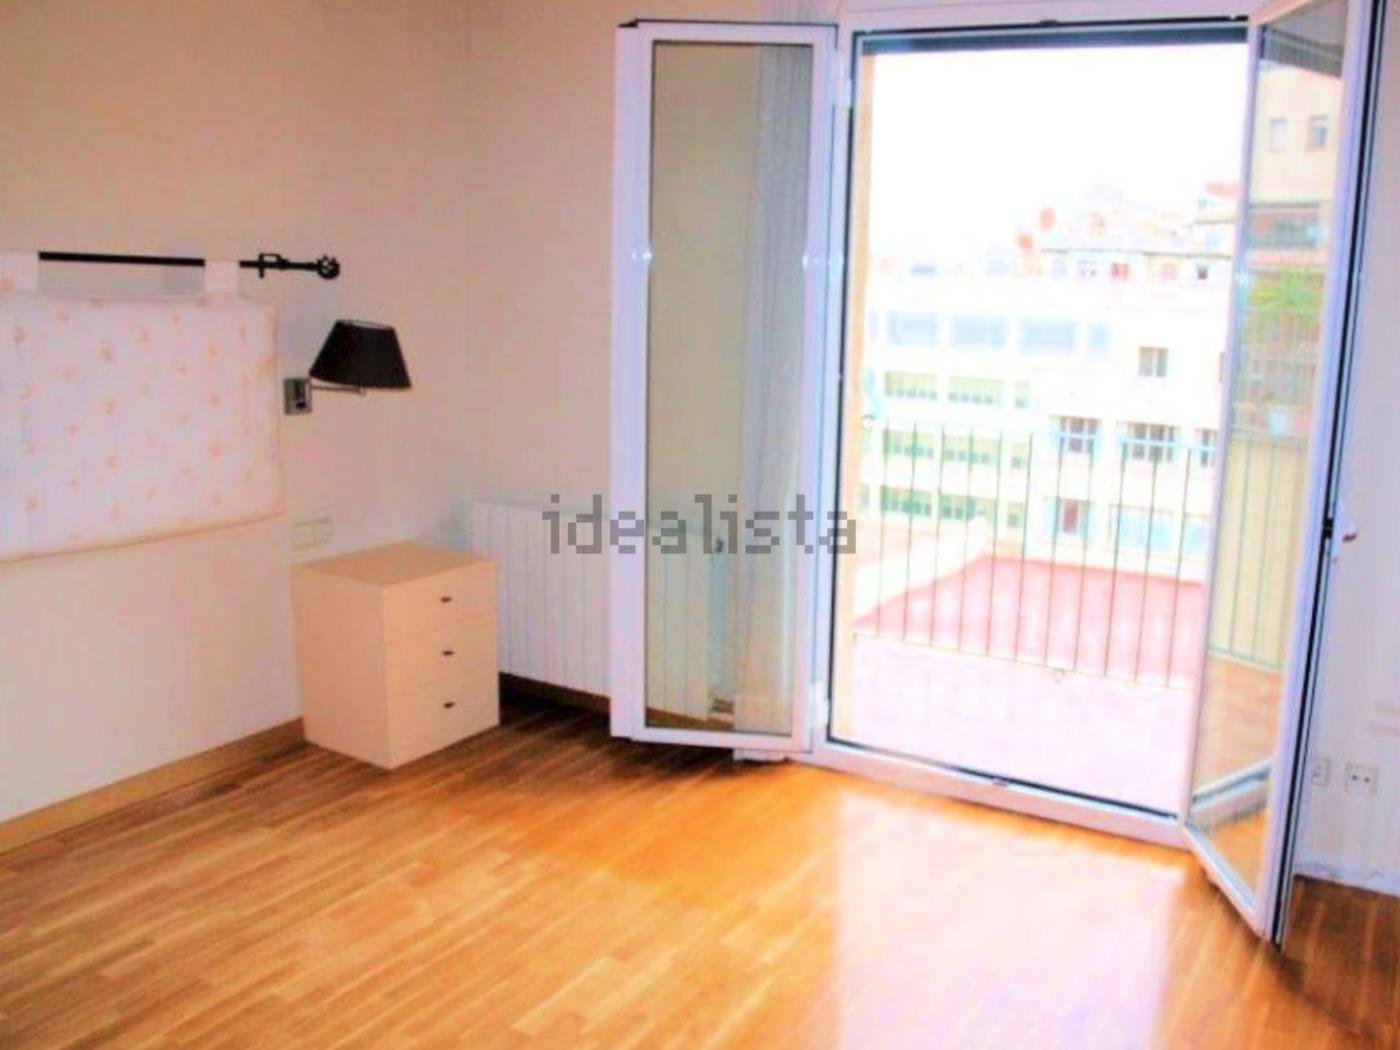 Spectacular 3-bedroom apartment in l'Eixample for long-terms - My Space Barcelona Apartments